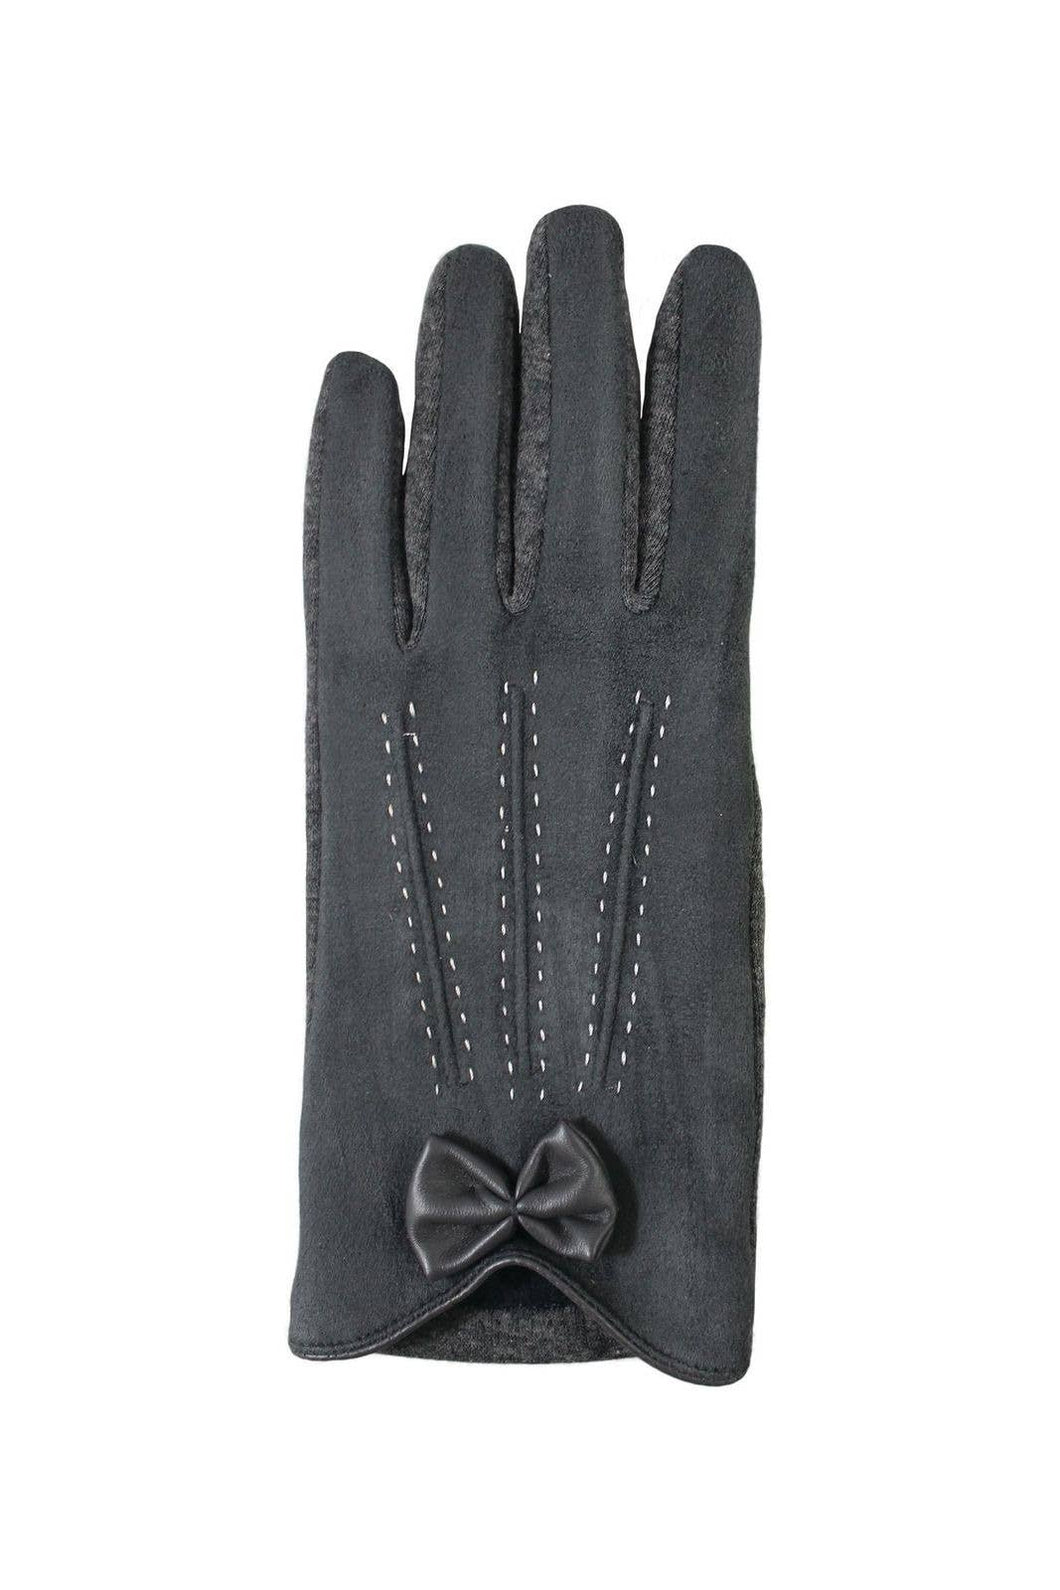 Black Suede gloves with bow and stitch detail